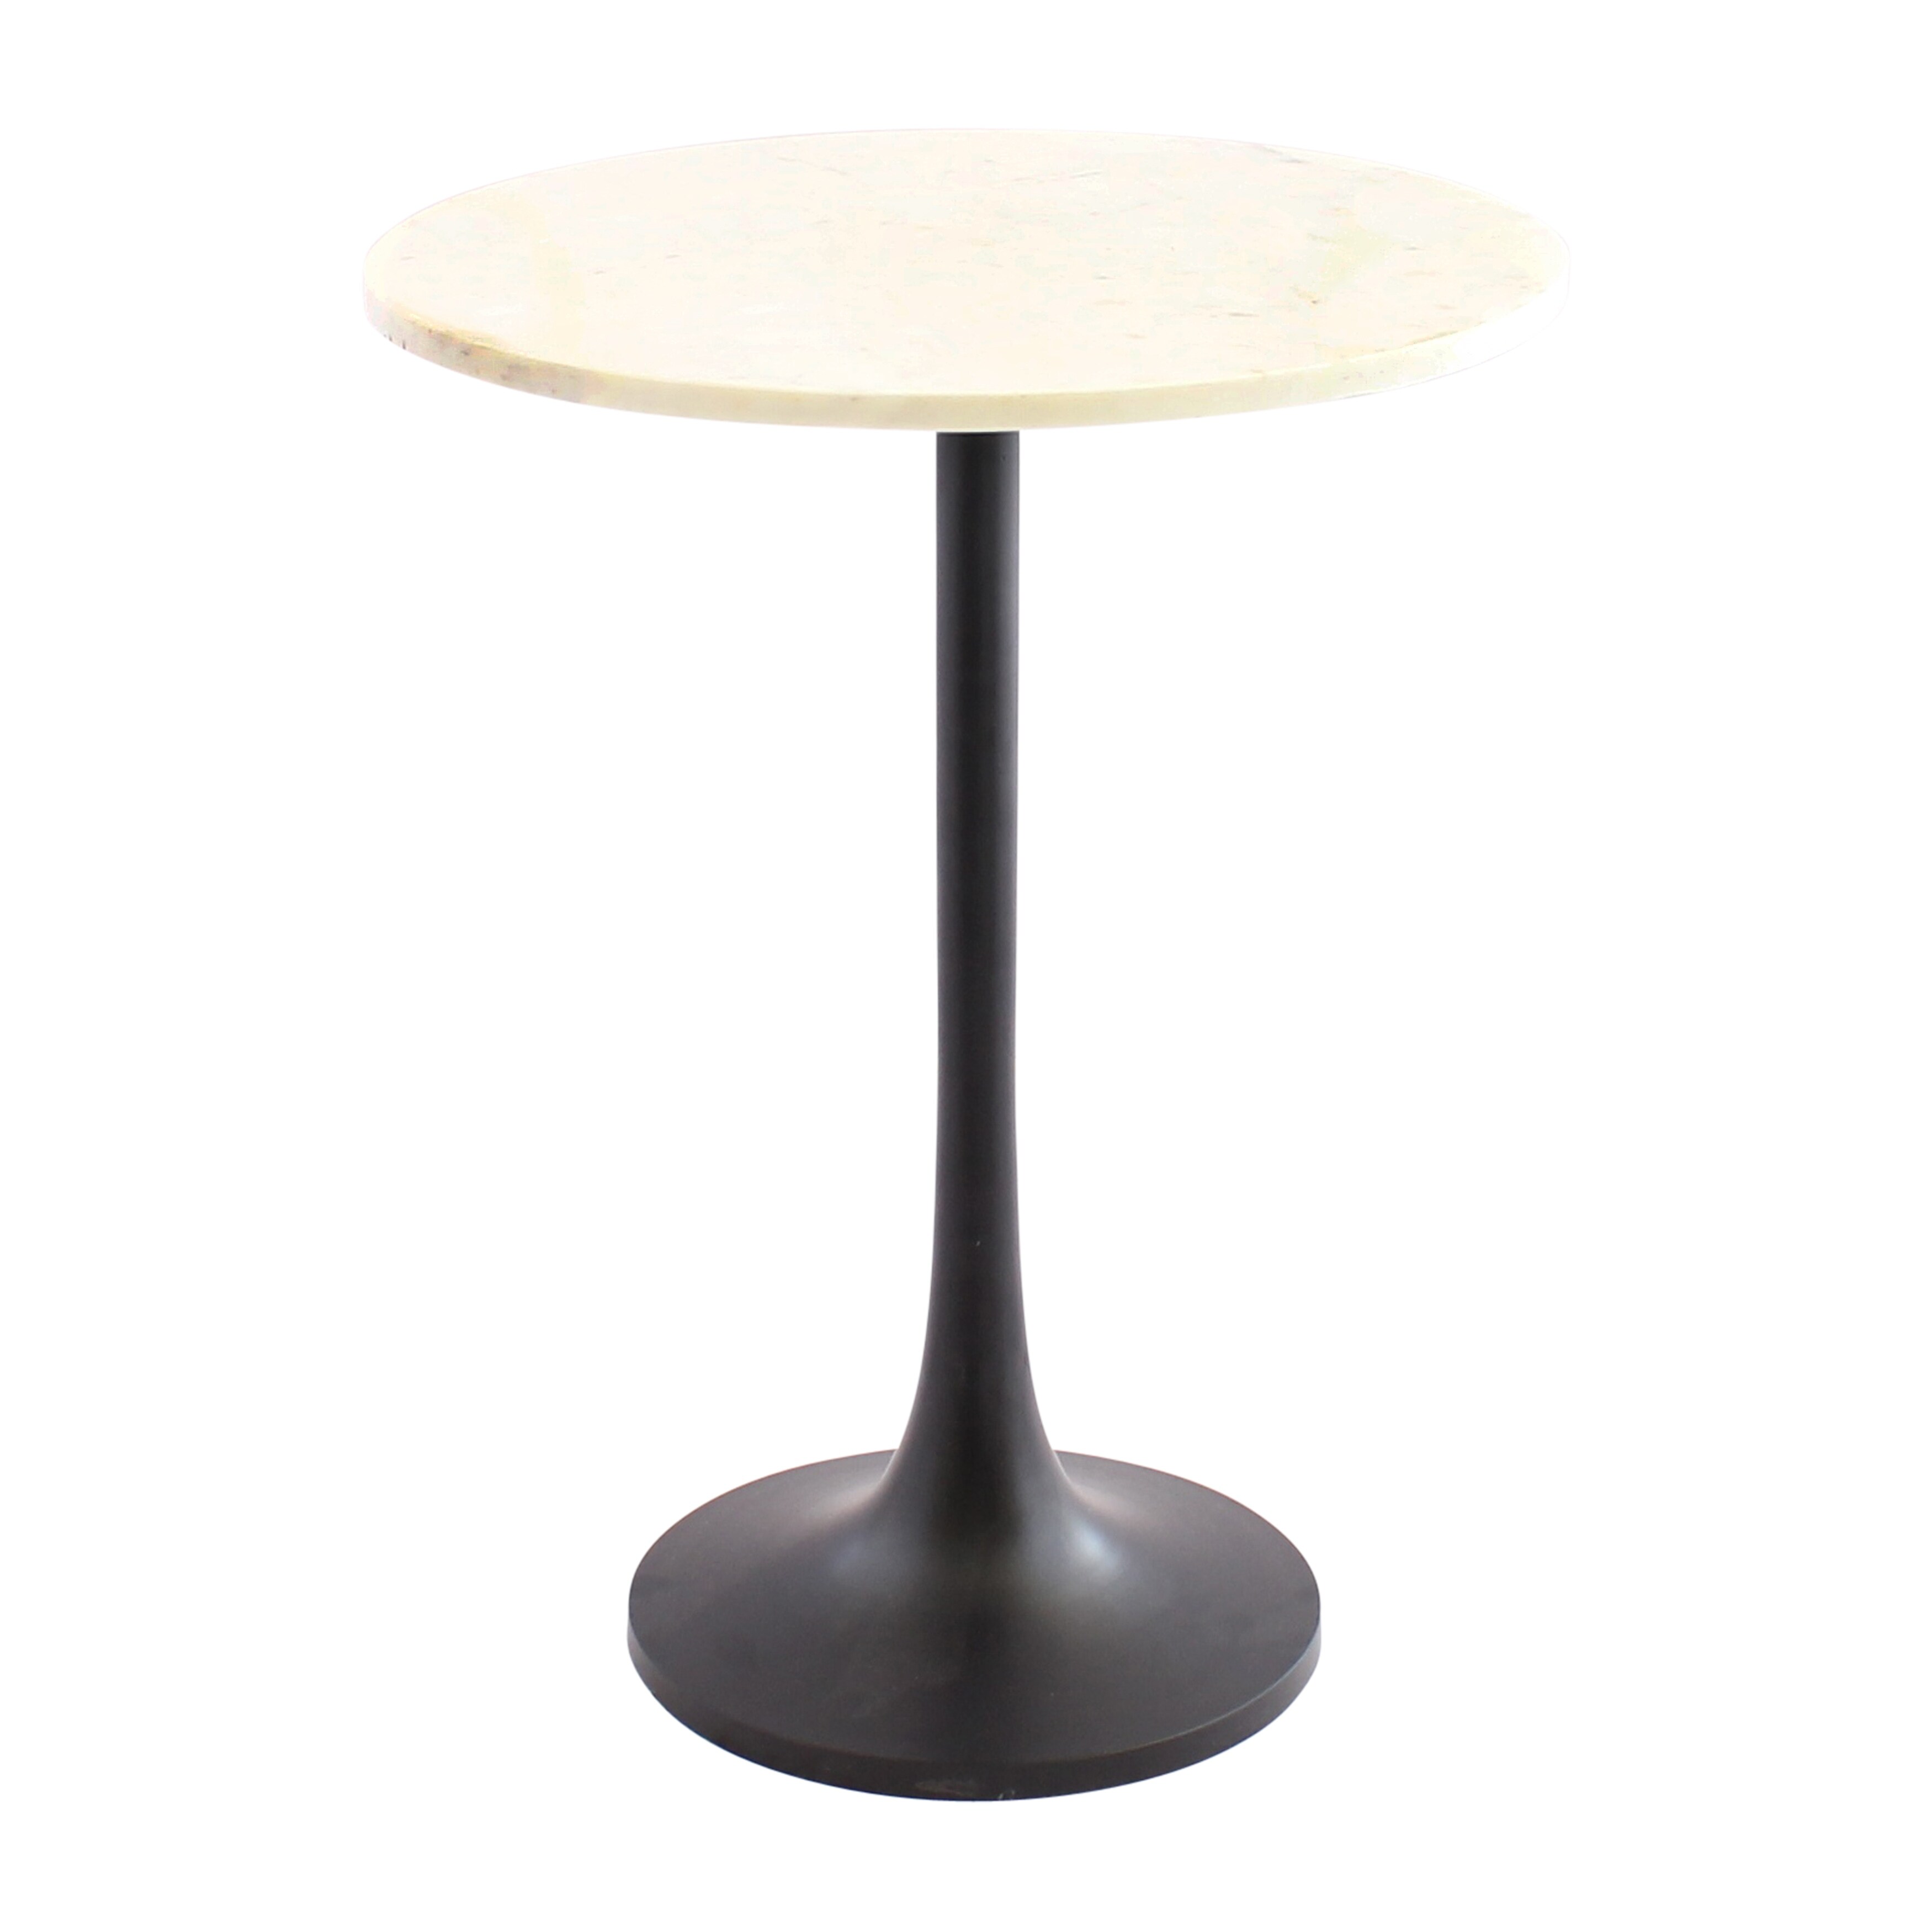 Metal, marble, 23"h Accent Table, Black 23.0"H - 18.0" x 18.0" x 23.0"